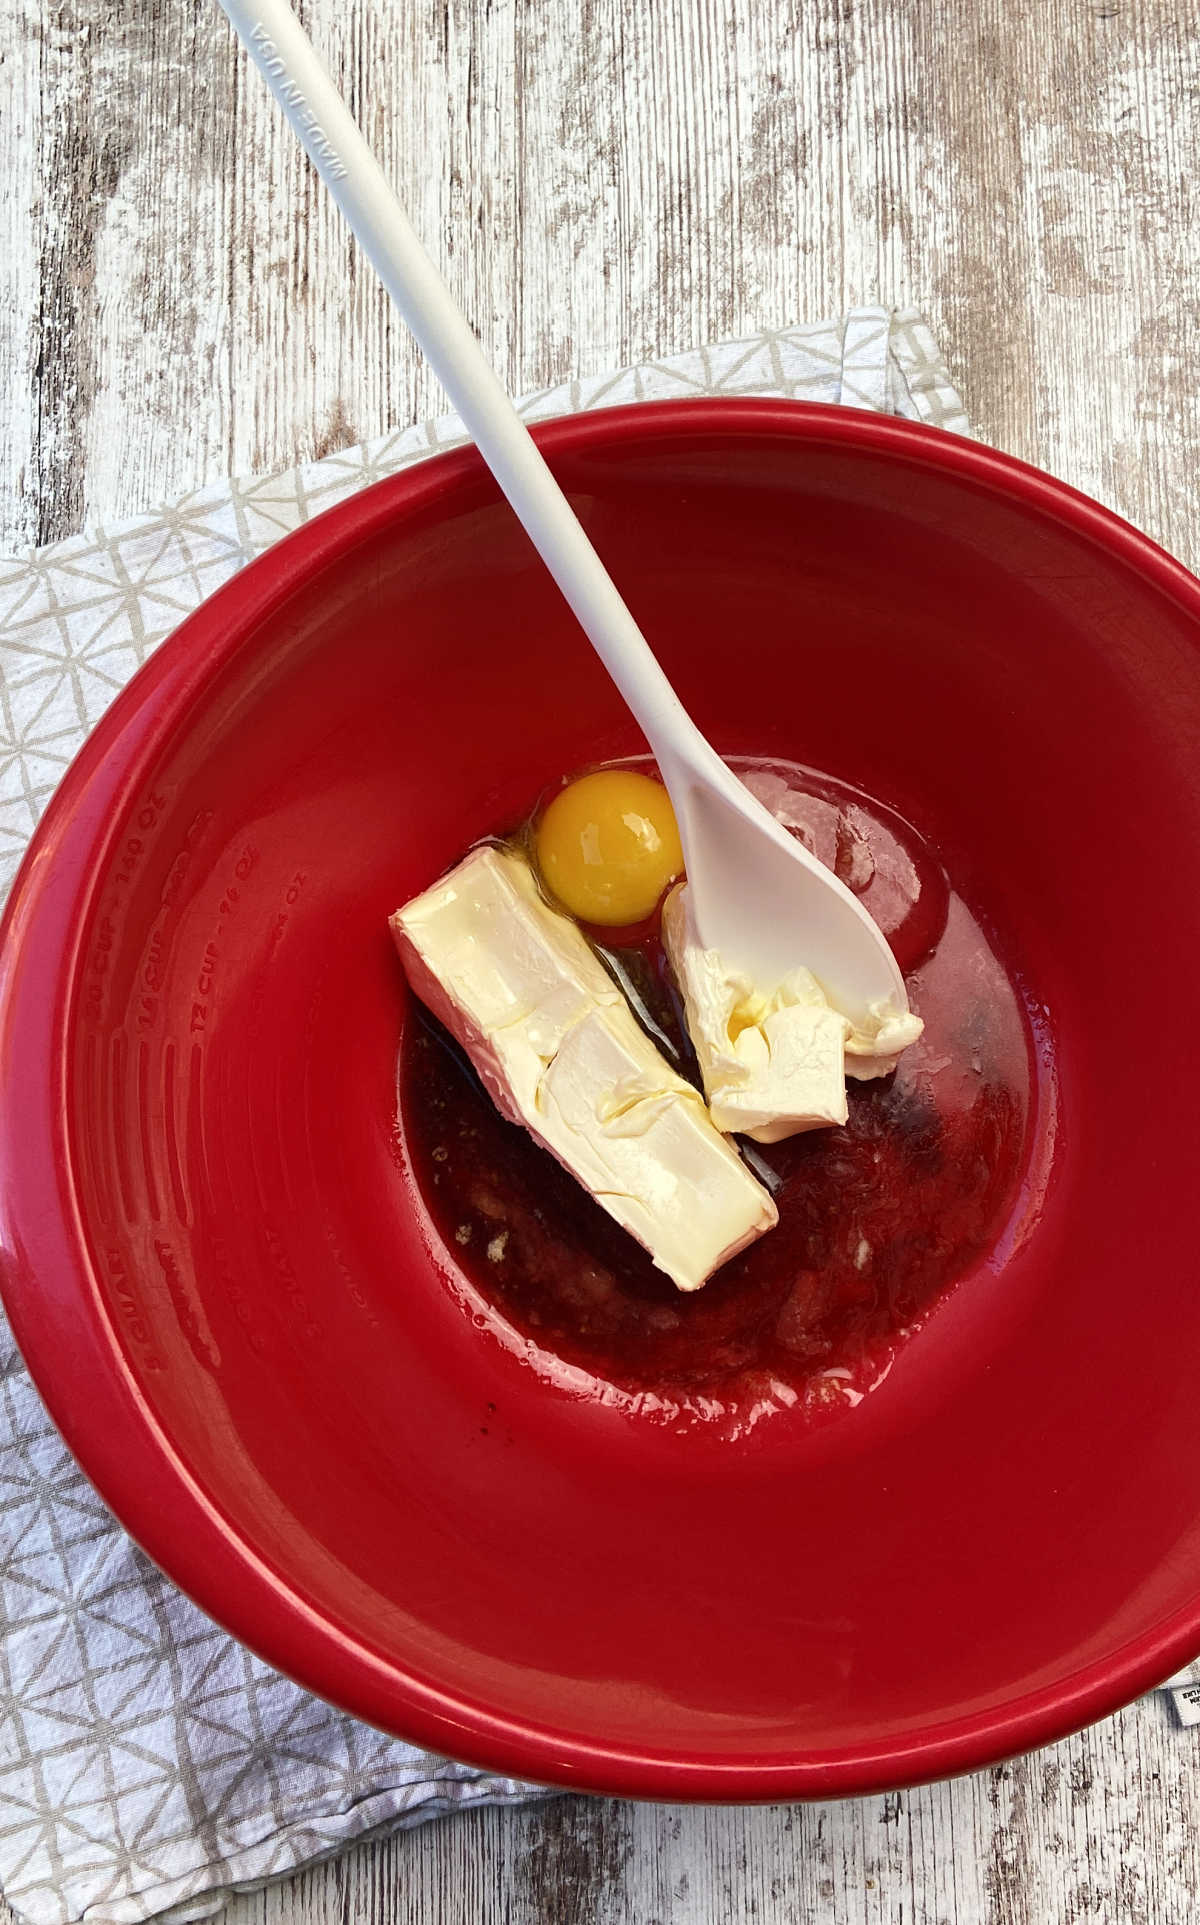 butter and egg in a red bowl.